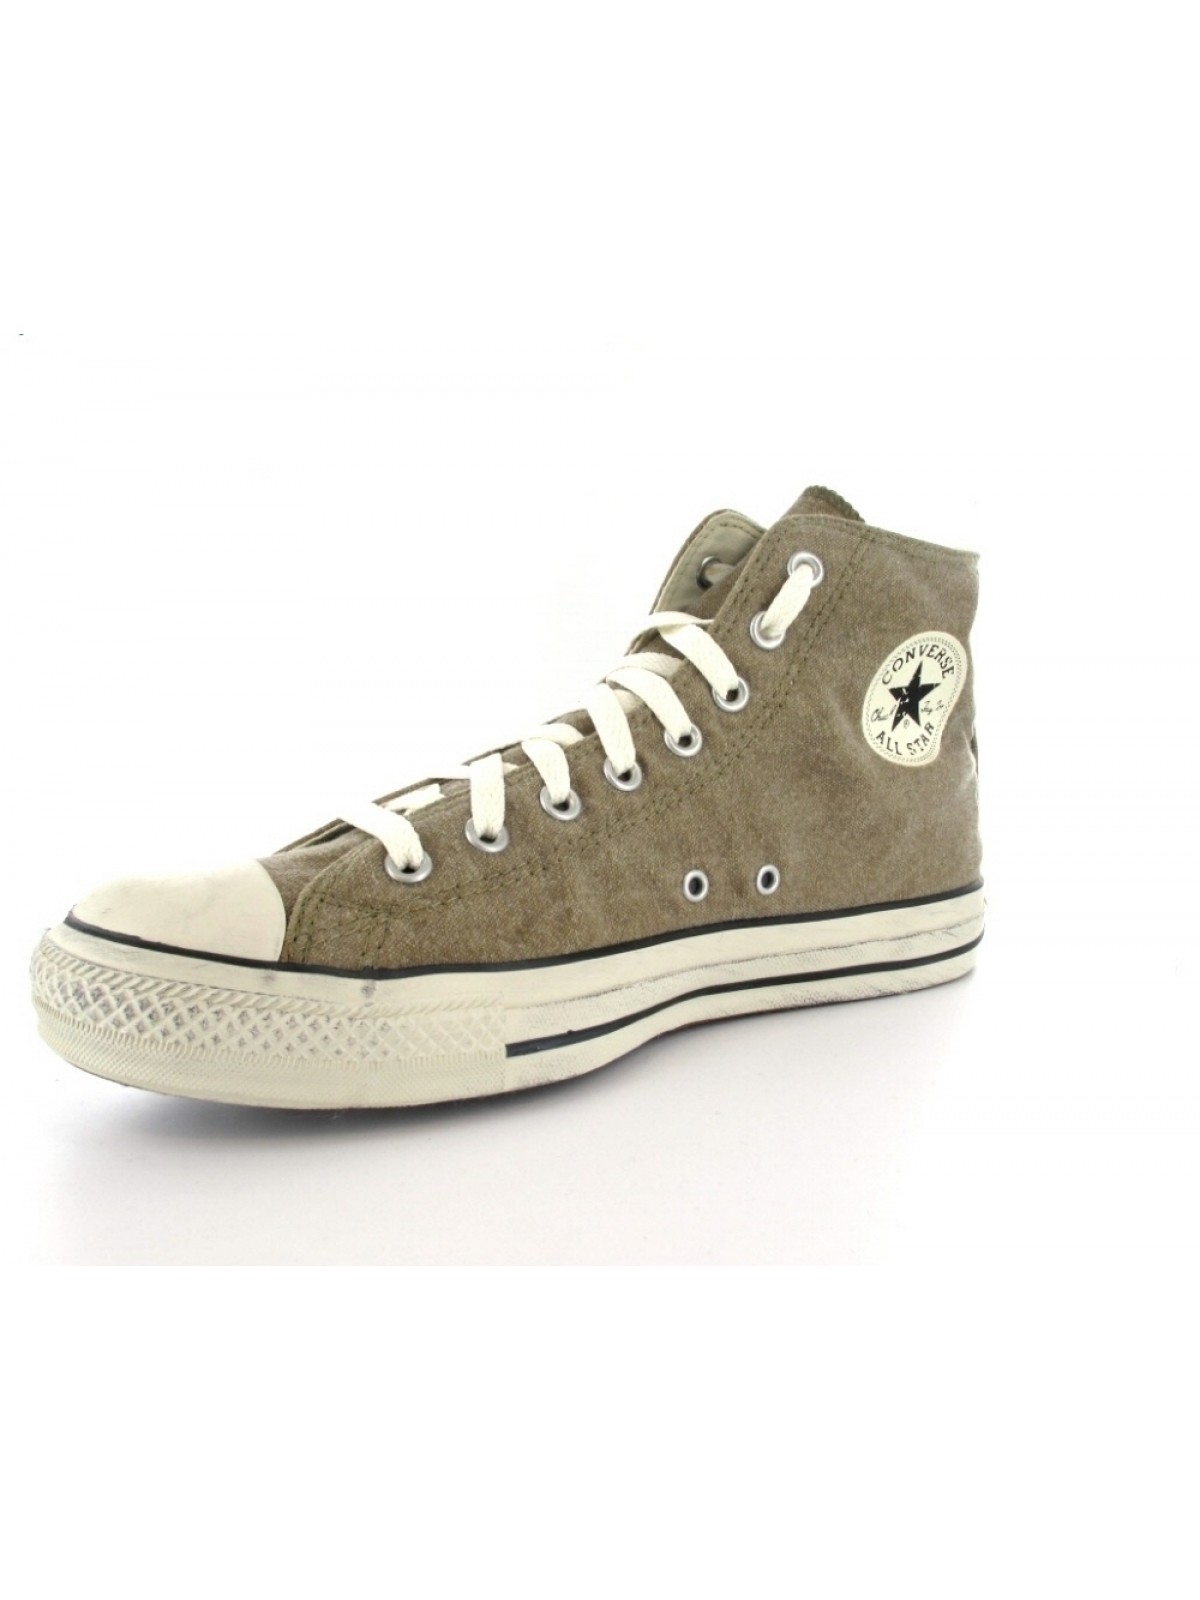 Converse Chuck Taylor all star toile delavée olive